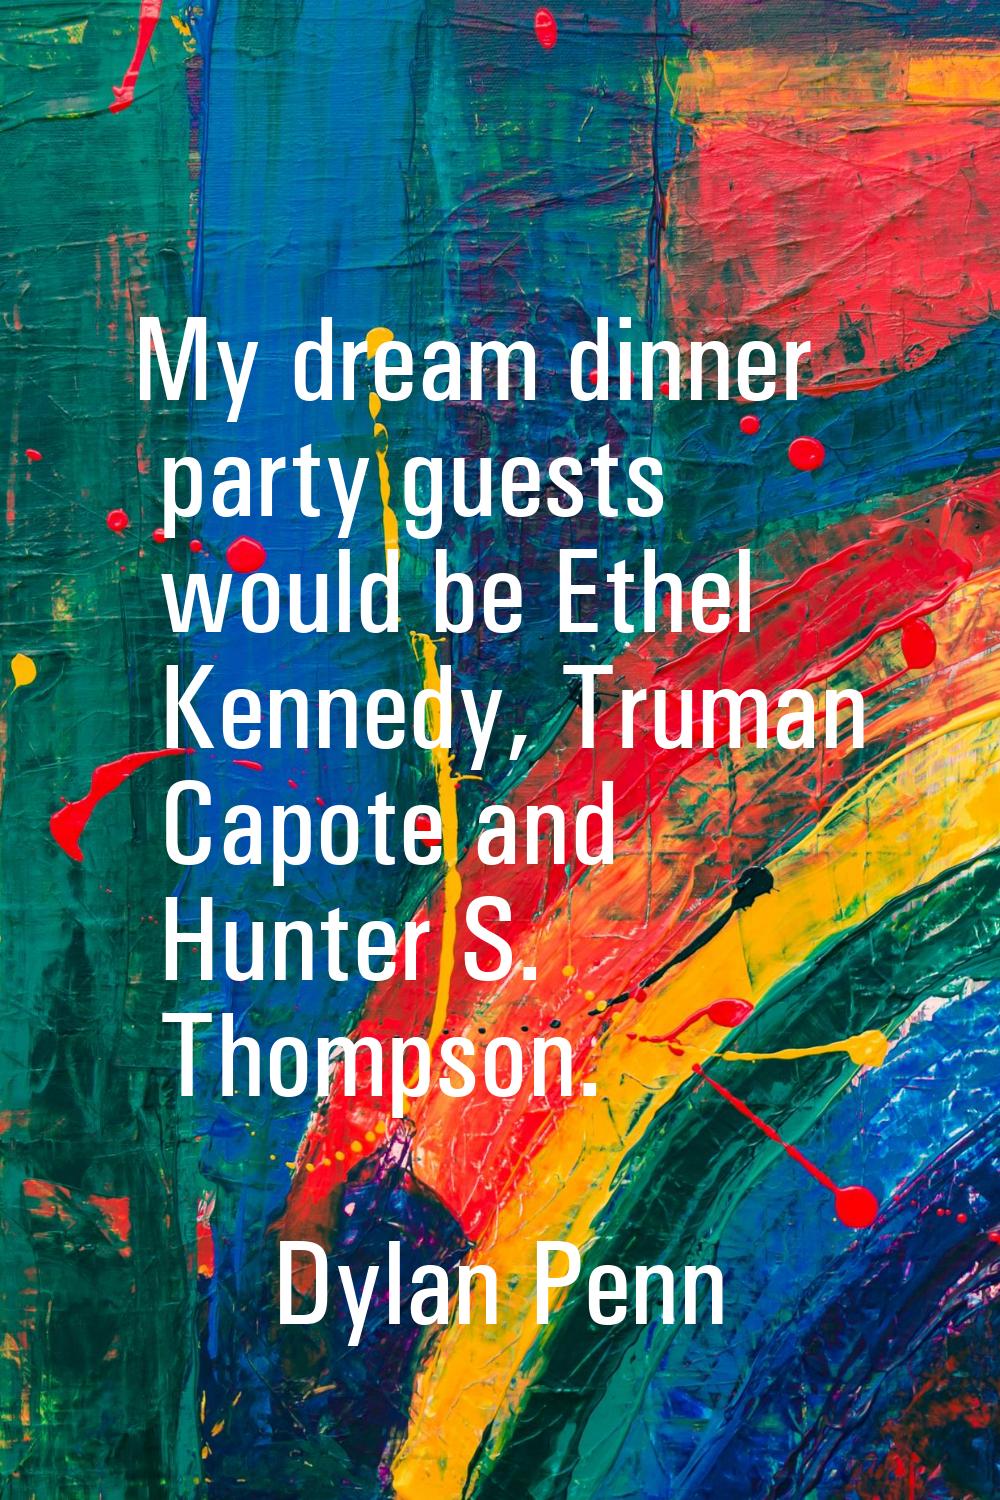 My dream dinner party guests would be Ethel Kennedy, Truman Capote and Hunter S. Thompson.